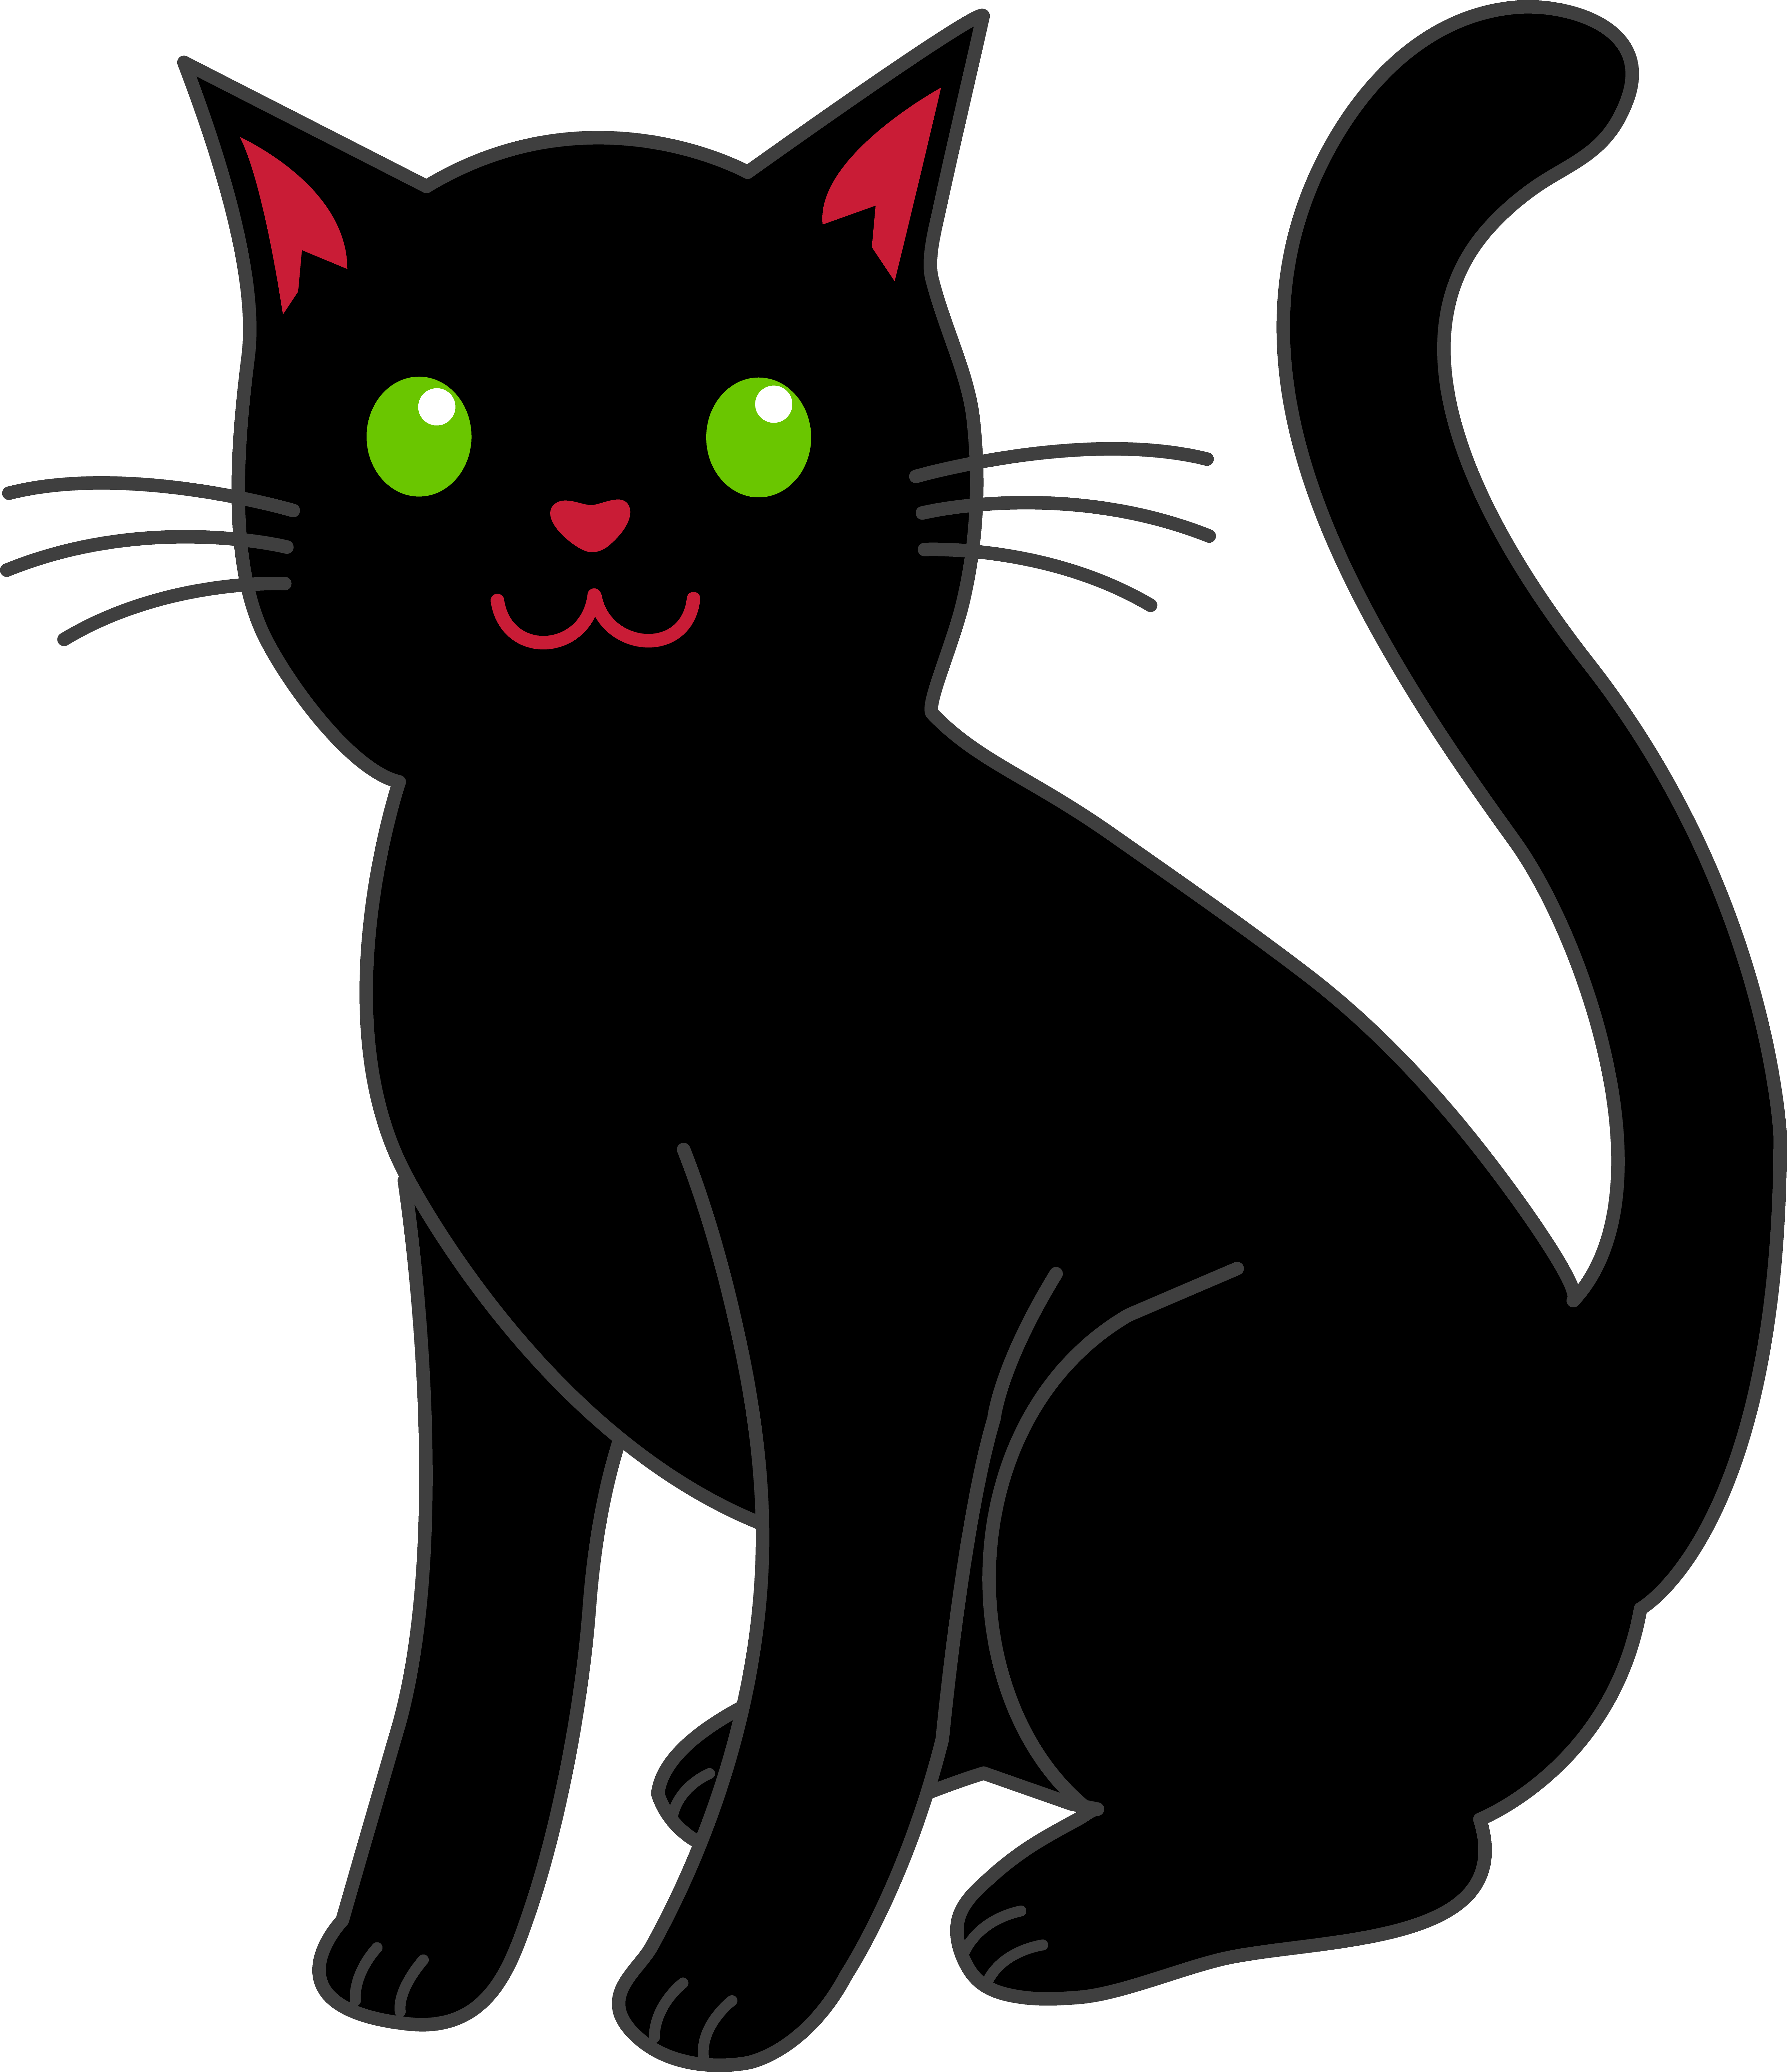 Search results for Free Images Of Black Cats | imagebasket.net